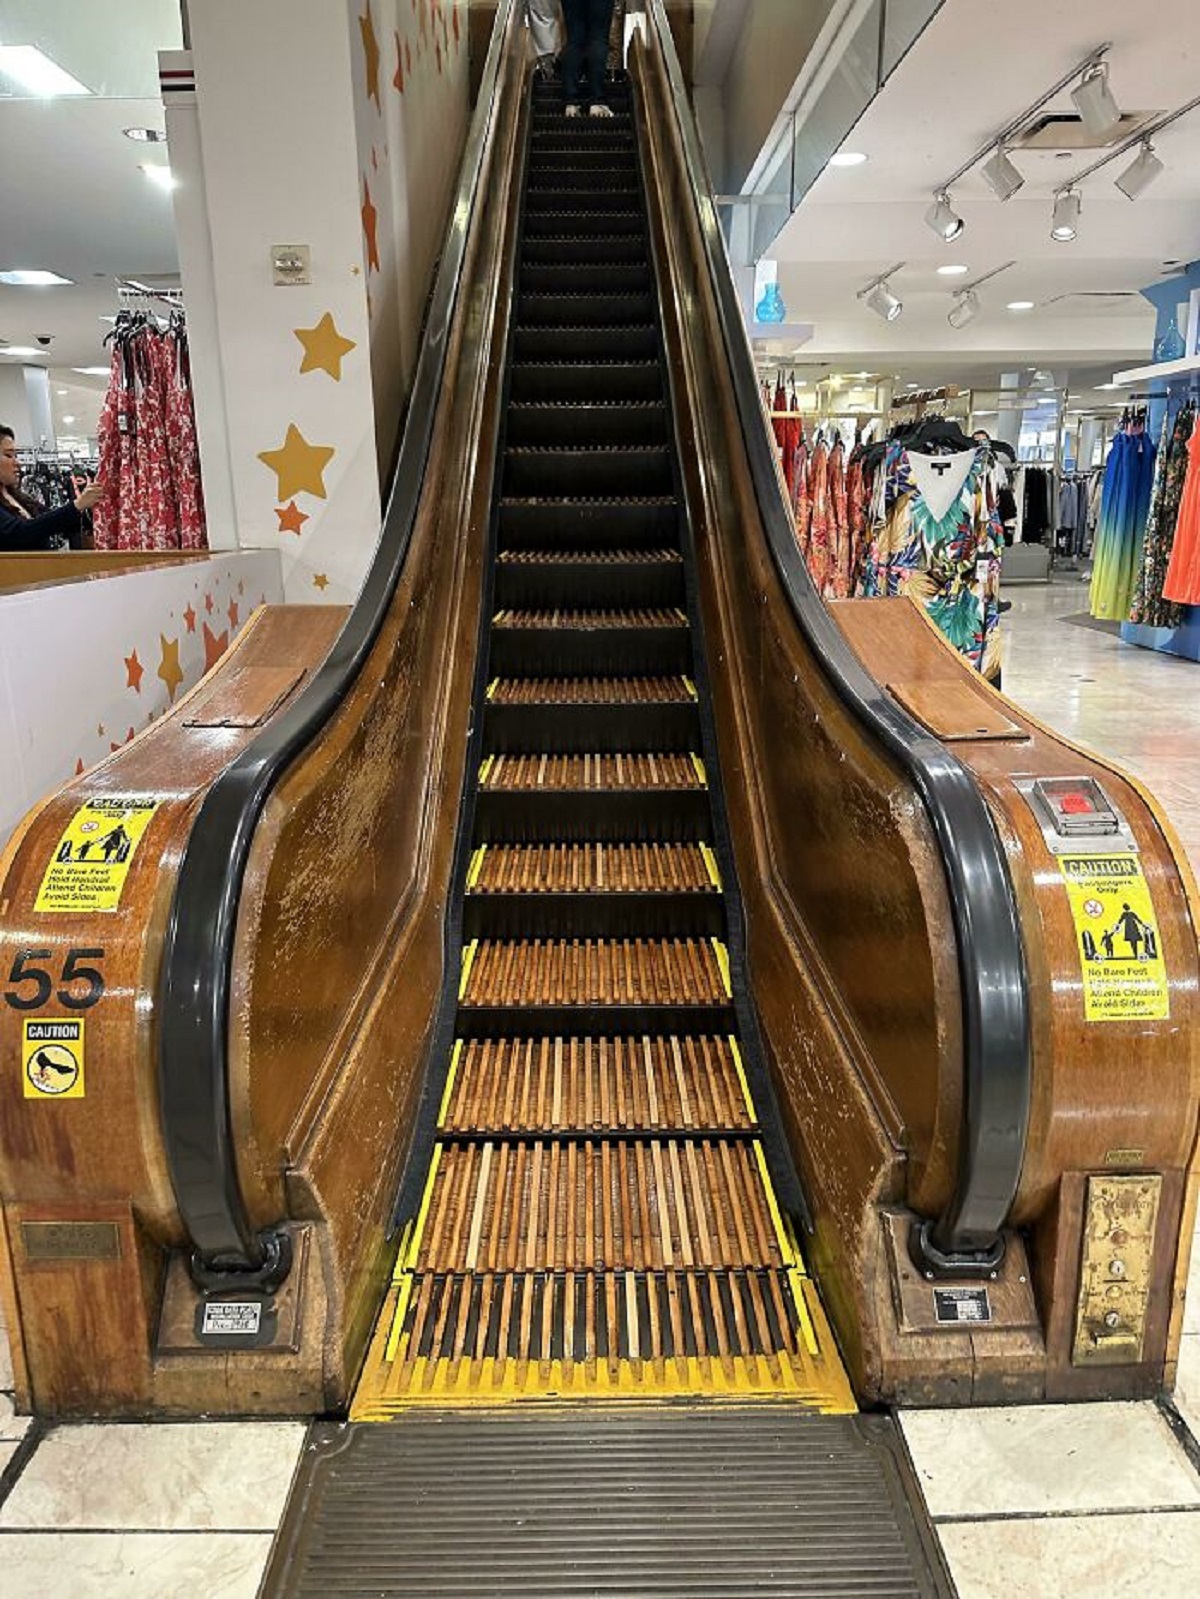 "I’m At The NYC Macys And The Escalator Is Made Out Of Wood"